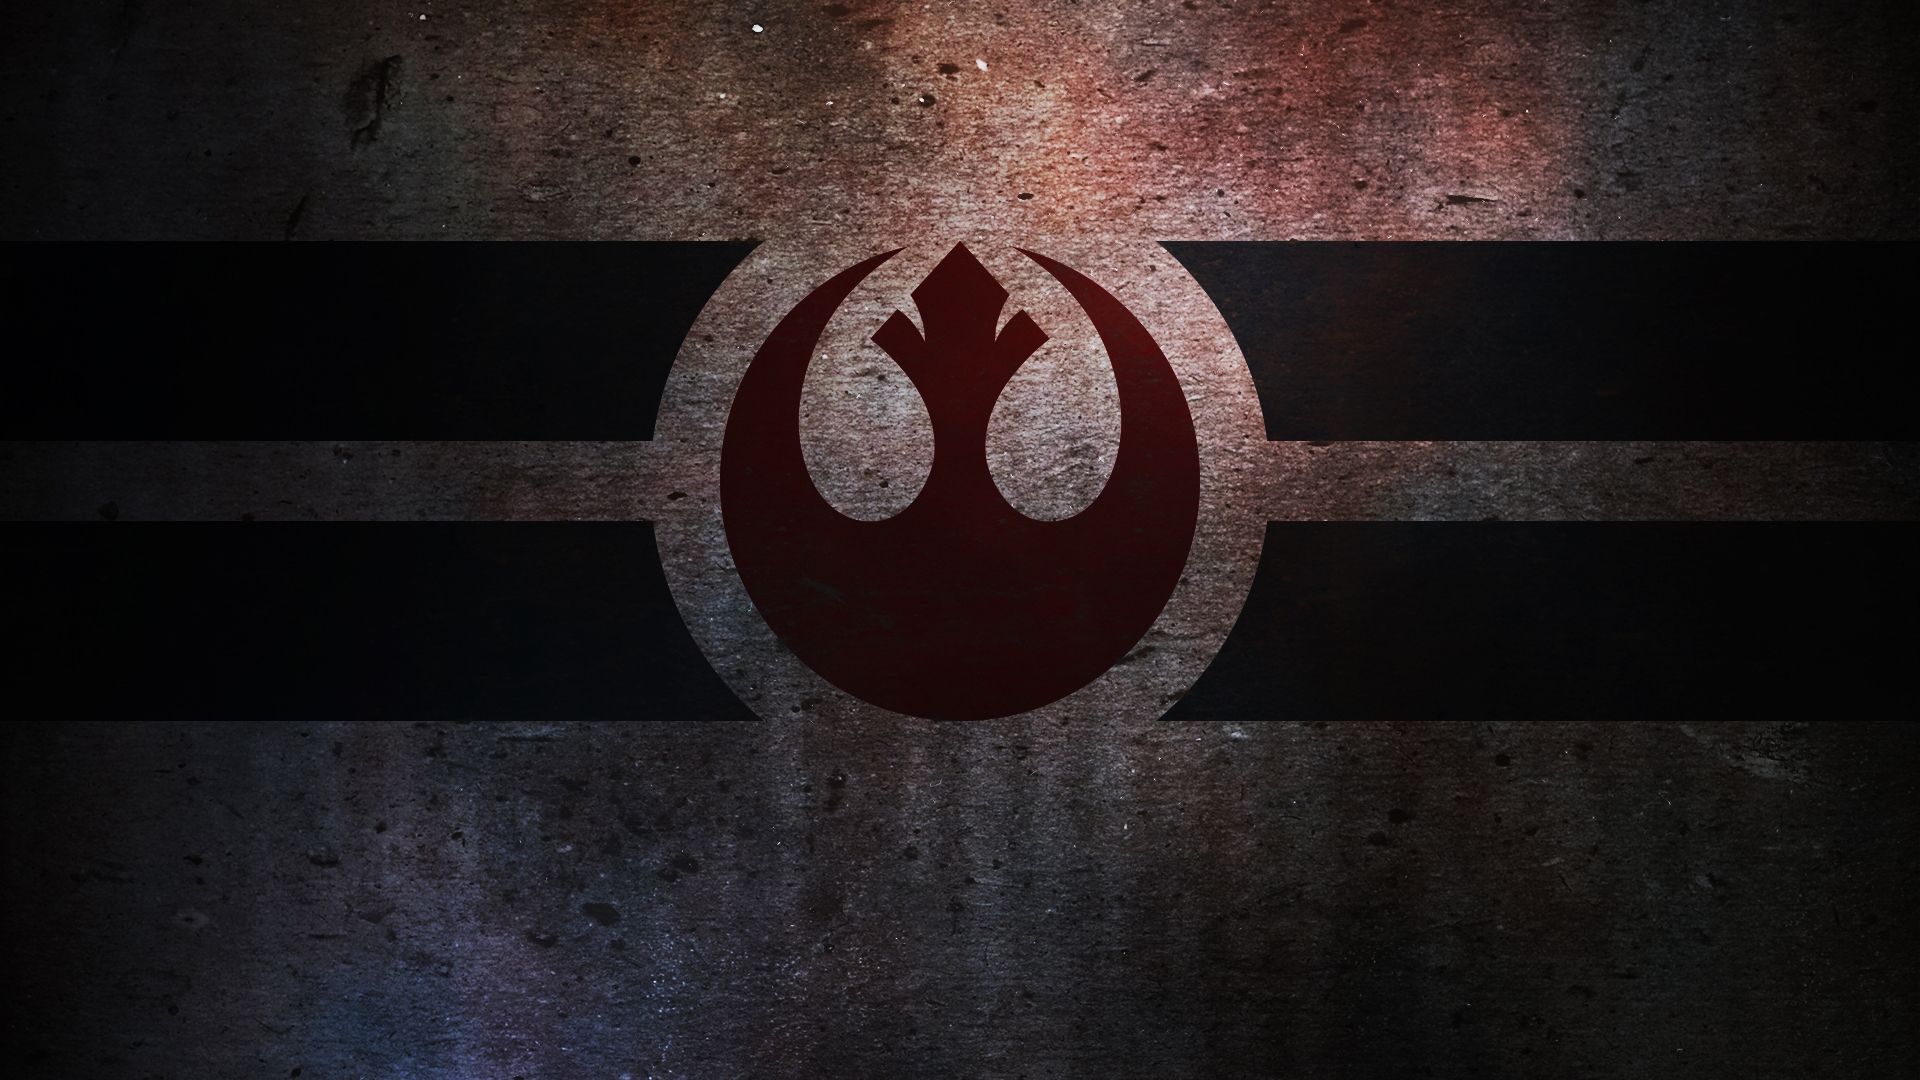 543 Star Wars HD Wallpapers | Backgrounds - Wallpaper Abyss - Page 6